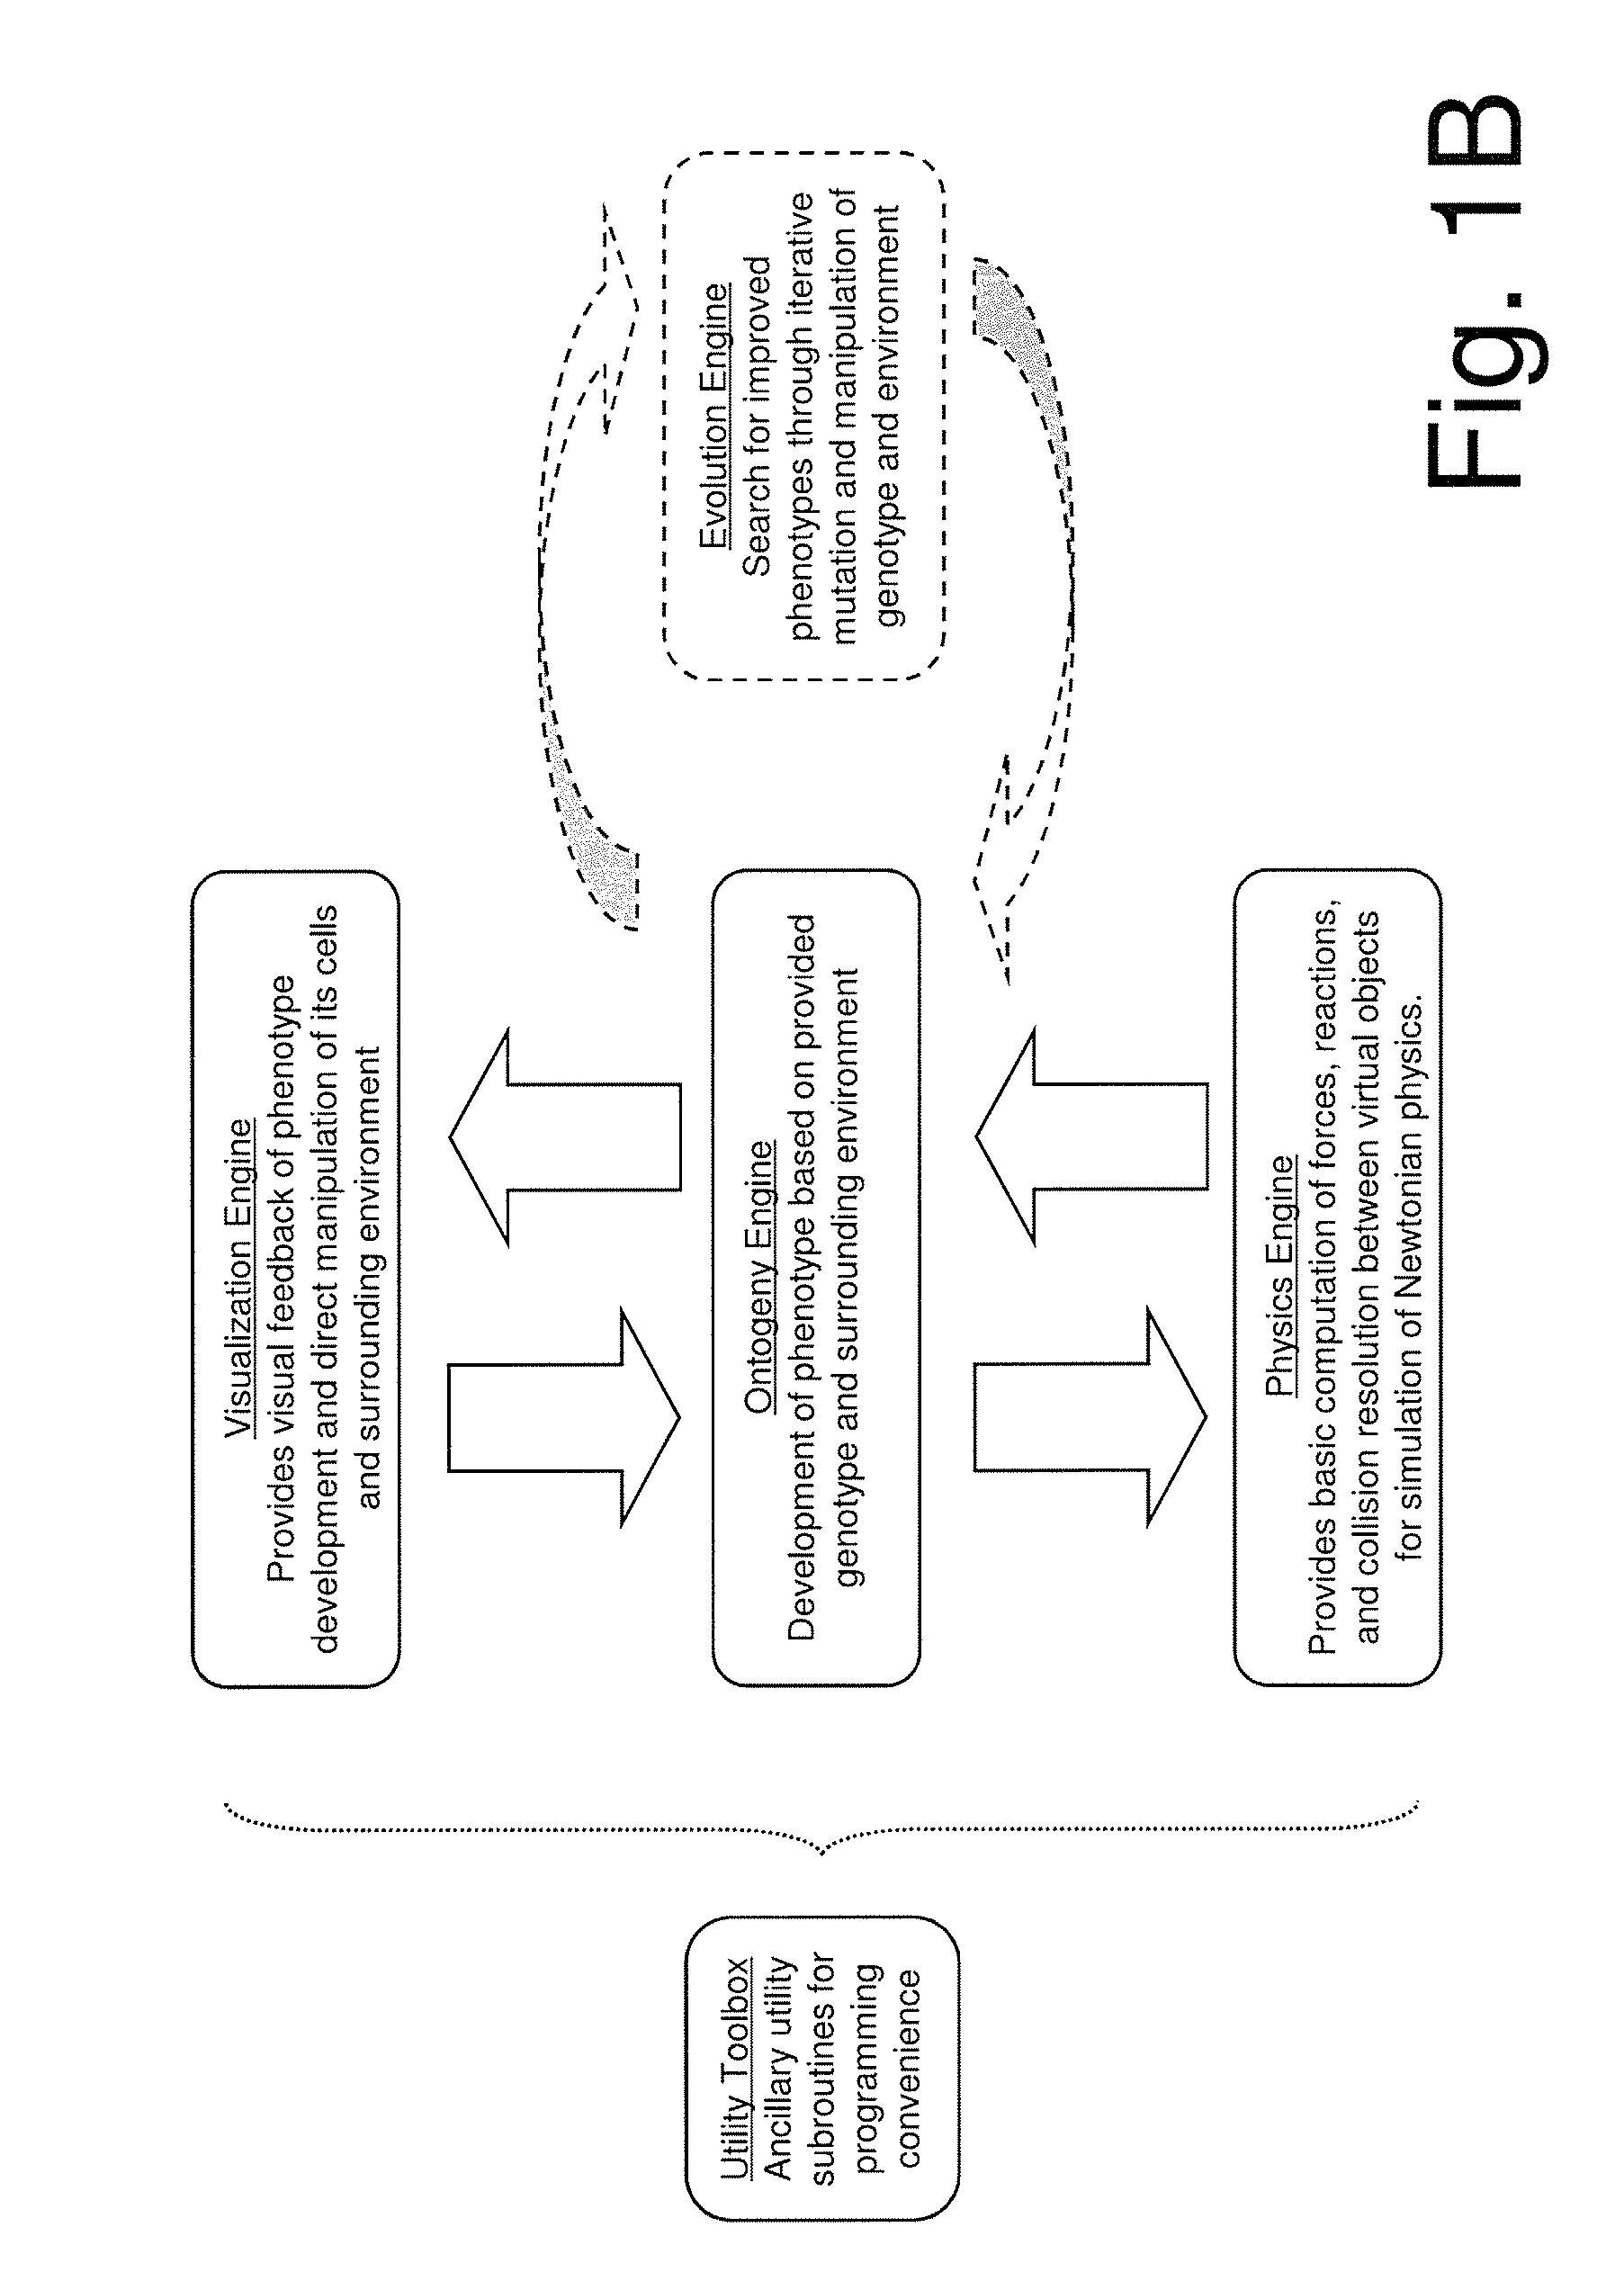 Virtual tissue with emergent behavior and modeling method for producing the tissue